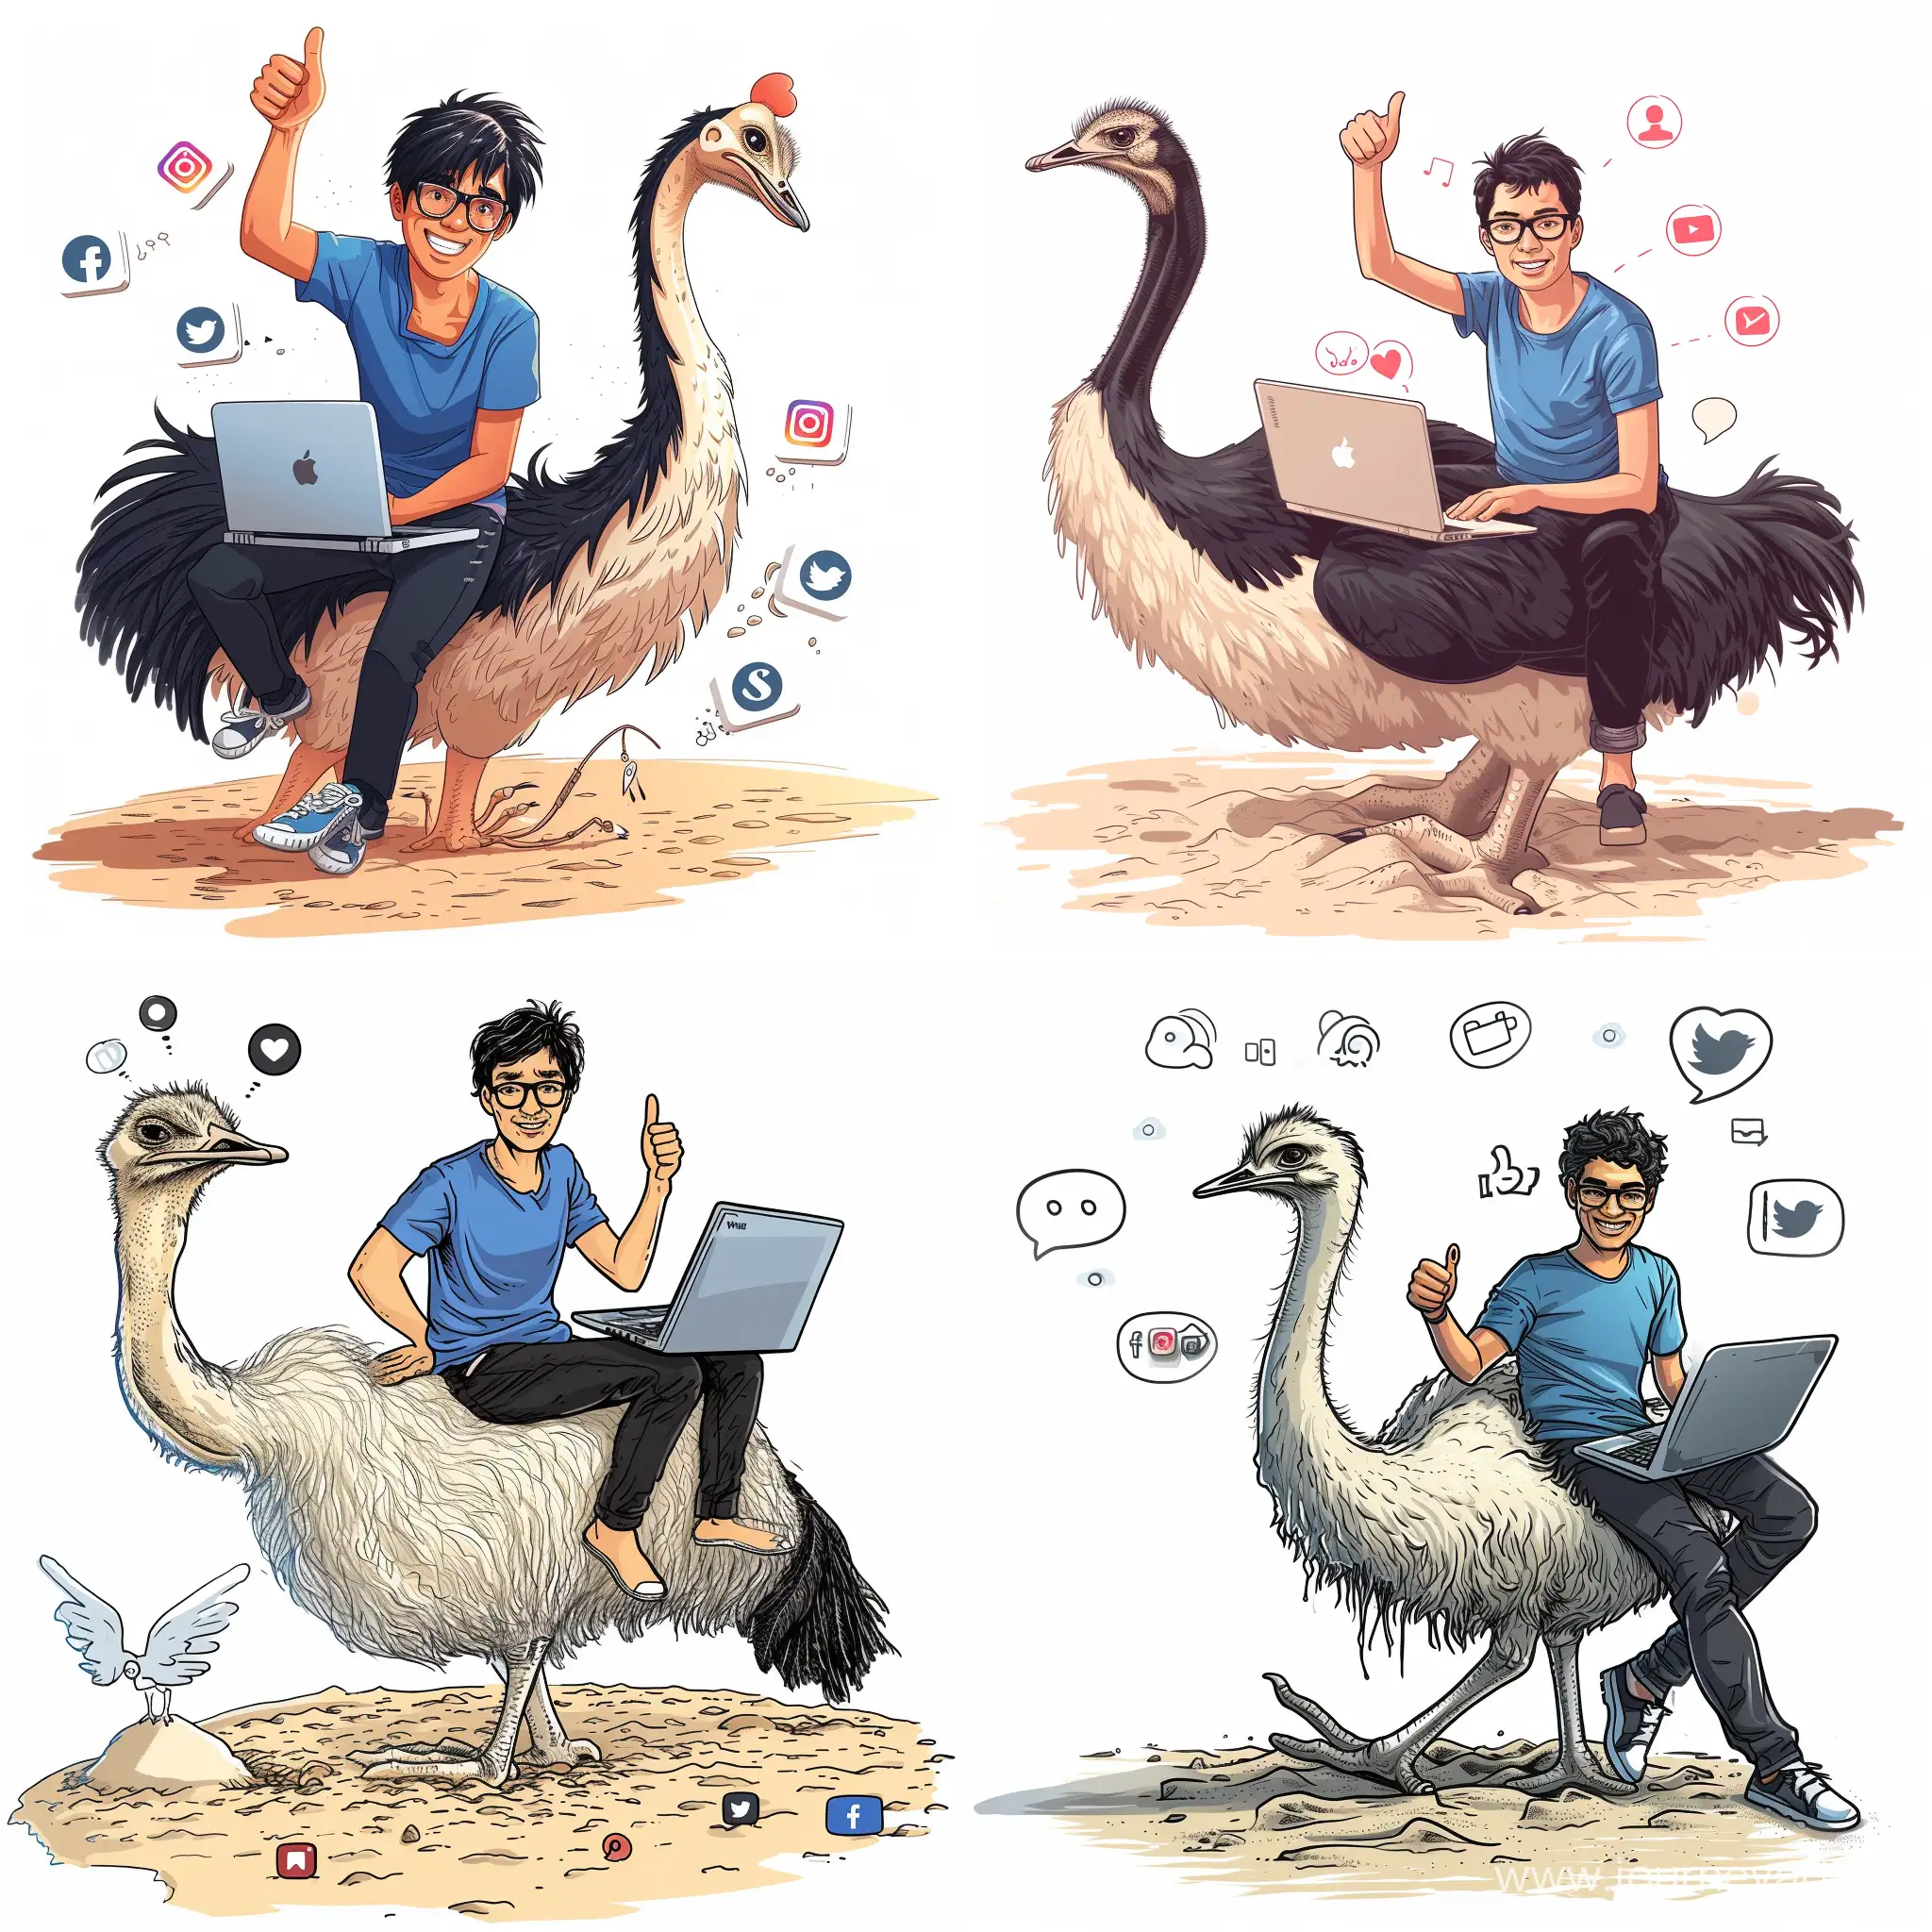 Enthusiastic-Programmer-Riding-Ostrich-with-Social-Media-Icons